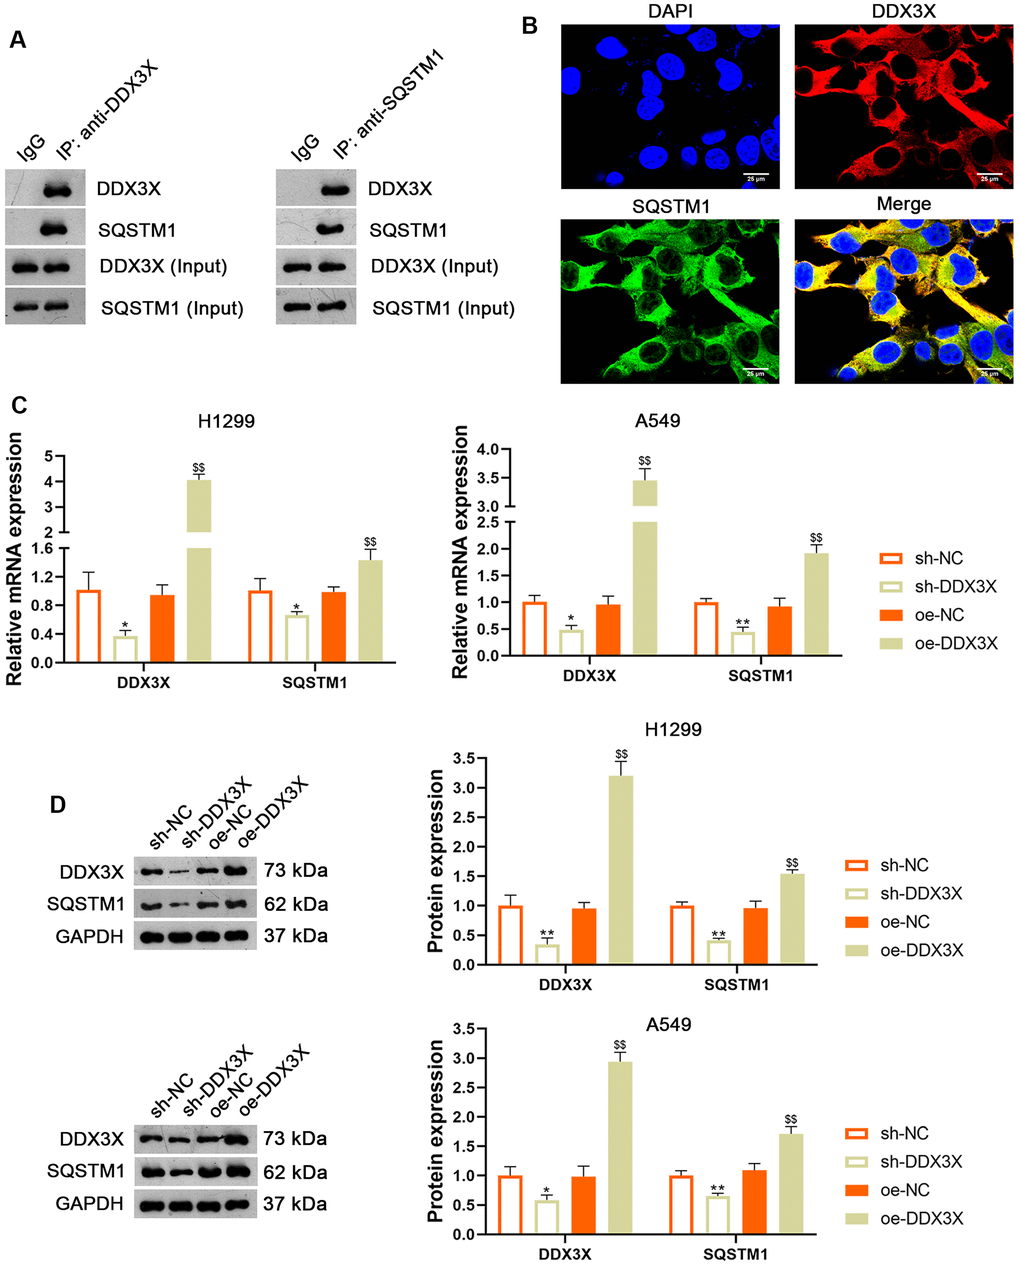 DDX3X interacts with SQSTM1 in LUAD cells. (A) The interaction between DDX3X and SQSTM1 was identified by co-immunoprecipitation. (B) Immunofluorescence detected the subcellular co-location of DDX3X and SQSTM1. Scale bar = 25 μm. (C, D) Relative mRNA and protein expression of DDX3X and SQSTM1 in H1299 and A549 cells were measured by RT-qPCR and western blotting, respectively. *p p . sh-NC; $$p . oe-NC. DDX3X, DEAD-Box helicase 3 X-Linked; SQSTMI1, sequestosome 1; LUAD, lung adenocarcinoma; RT-qPCR, reverse transcription-quantitative PCR.